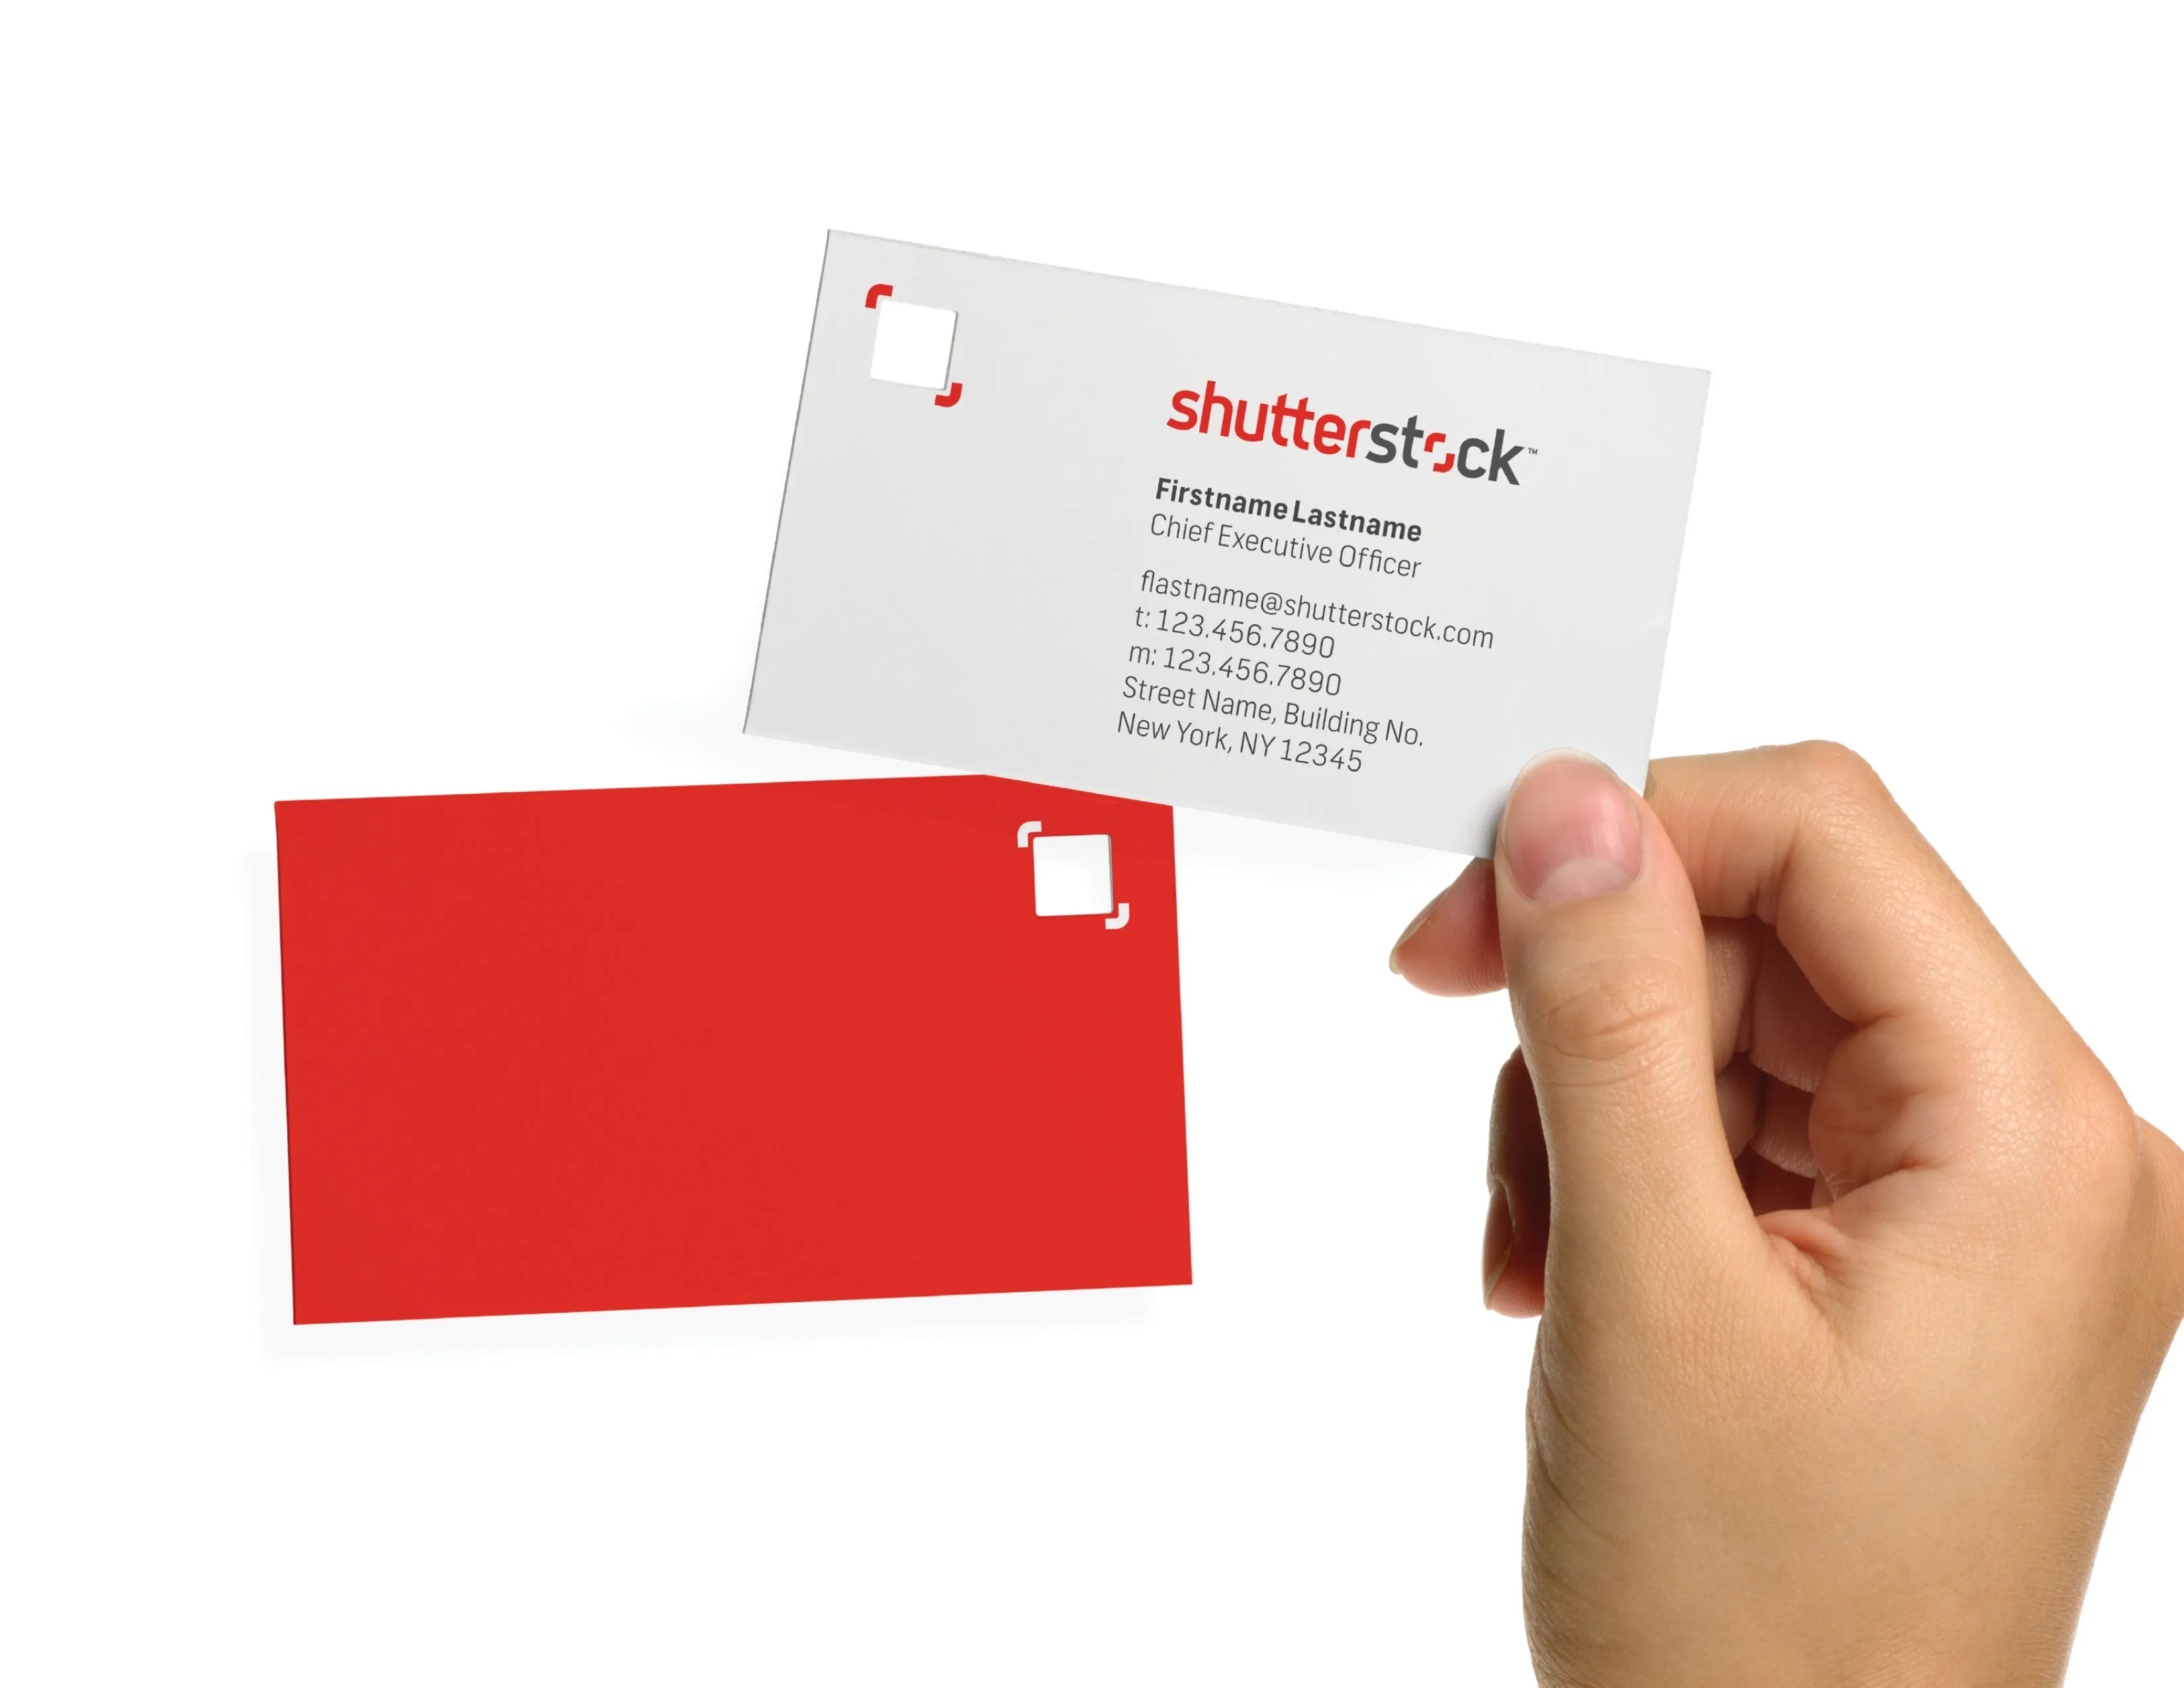 Capturing Self-Expression for Shutterstock - Graphis